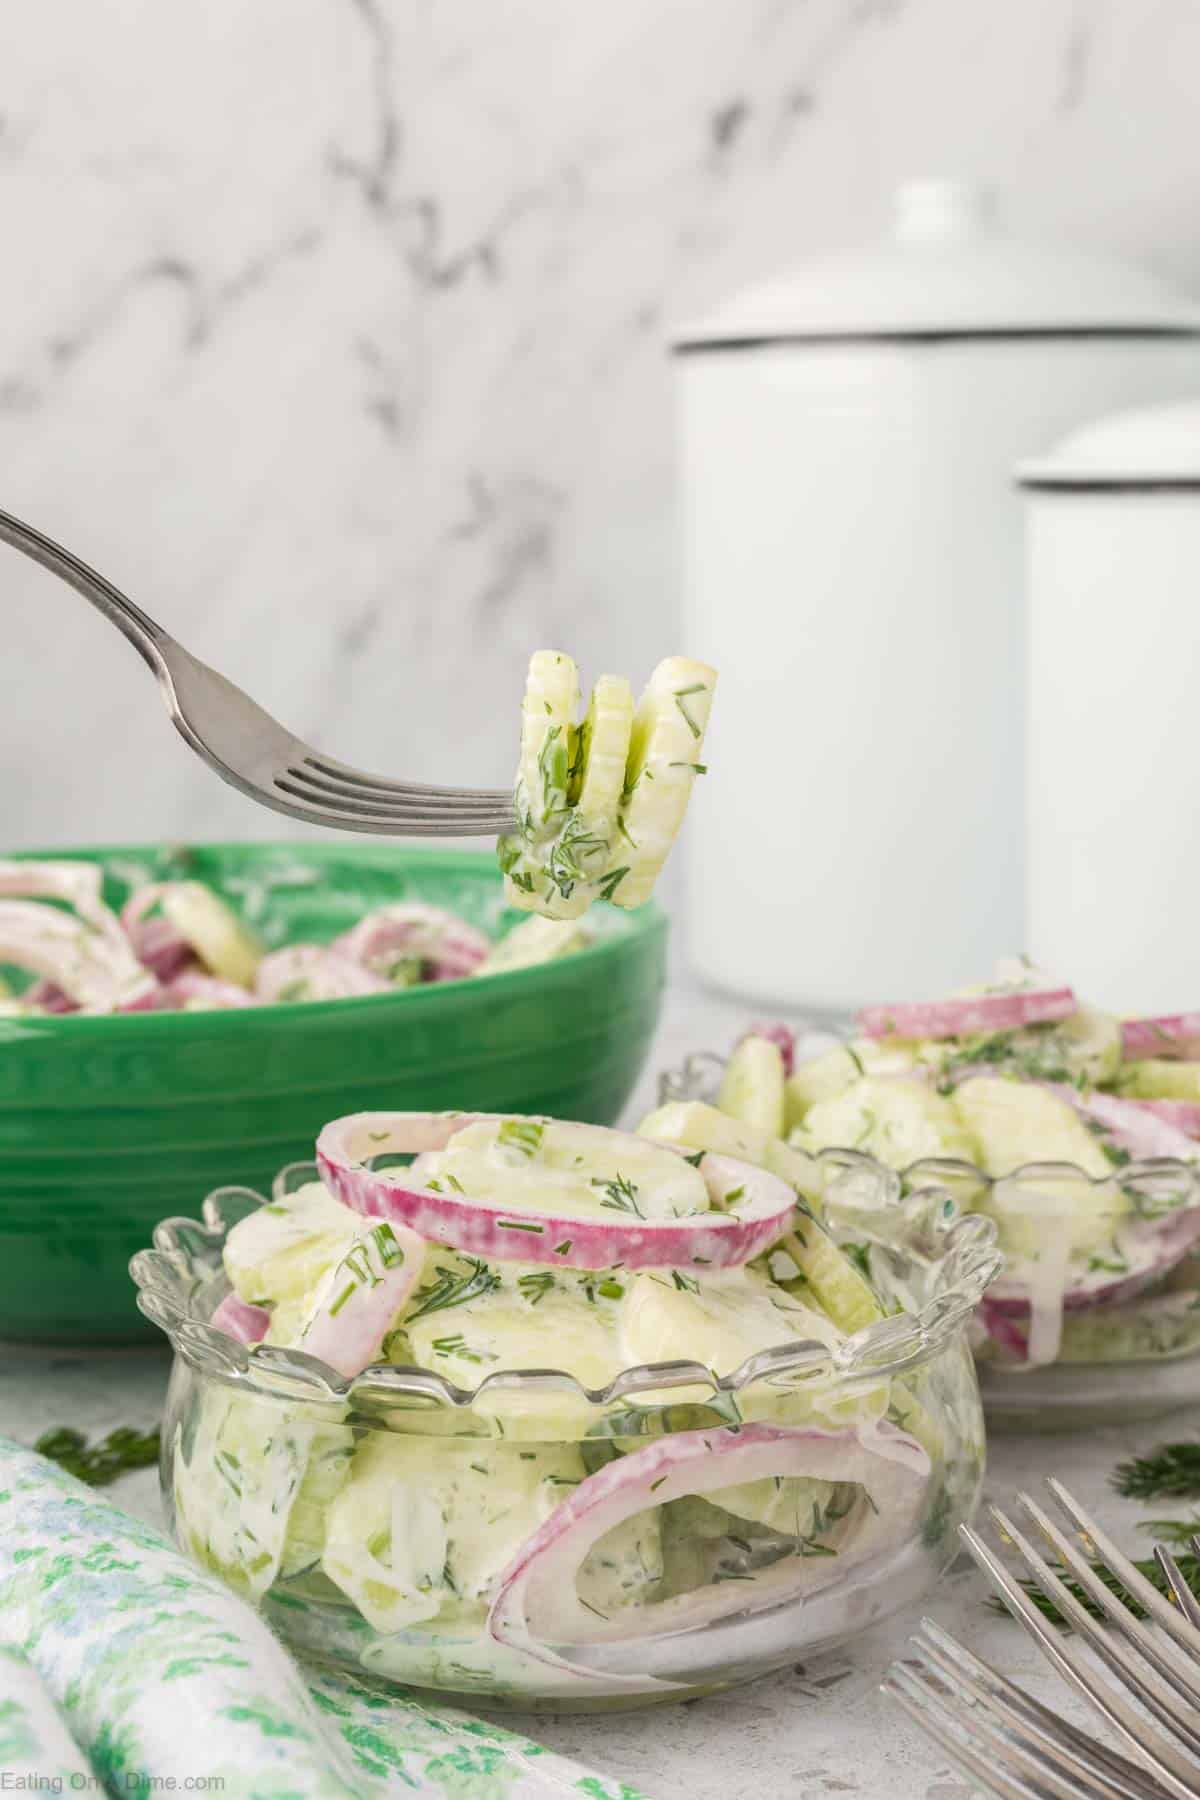 Creamy cucumber salad in a bowl with a bite on a fork